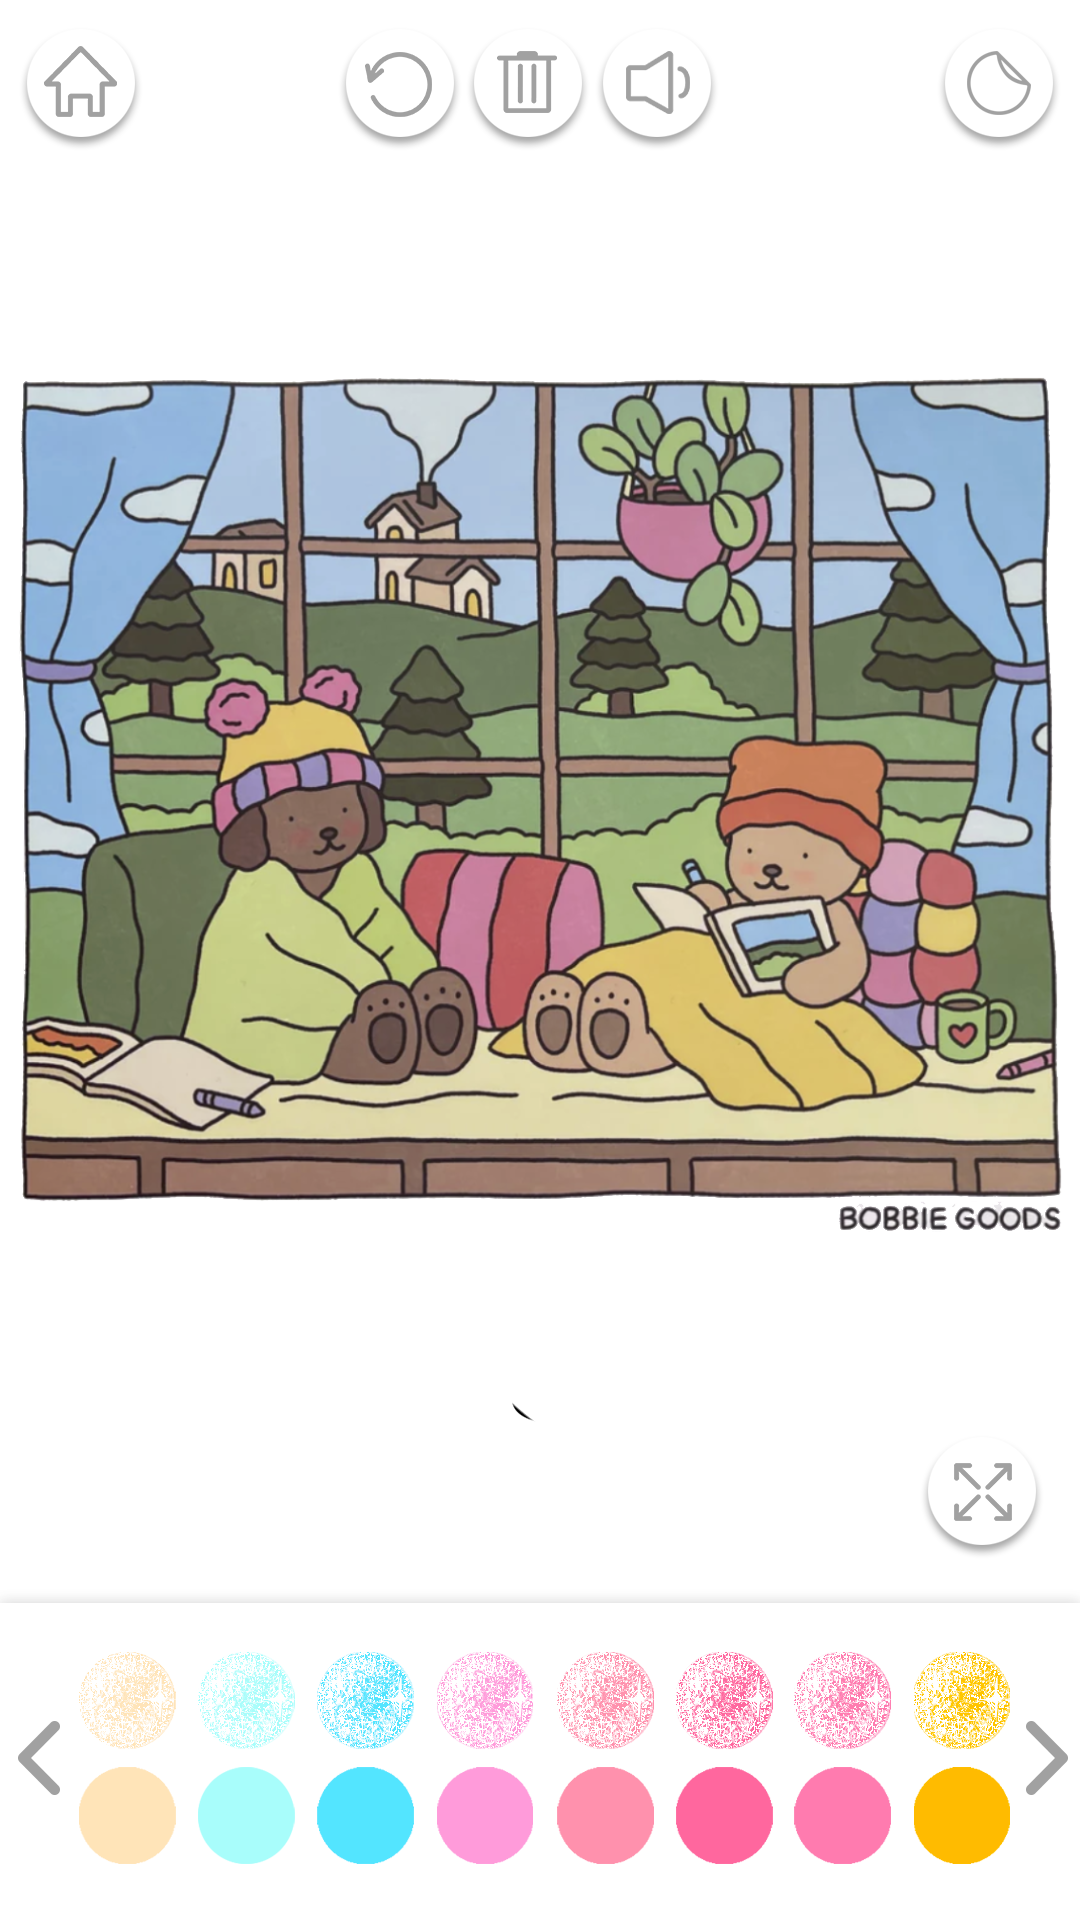 Bobbie goods  Coloring pages, Detailed coloring pages, Bear coloring pages